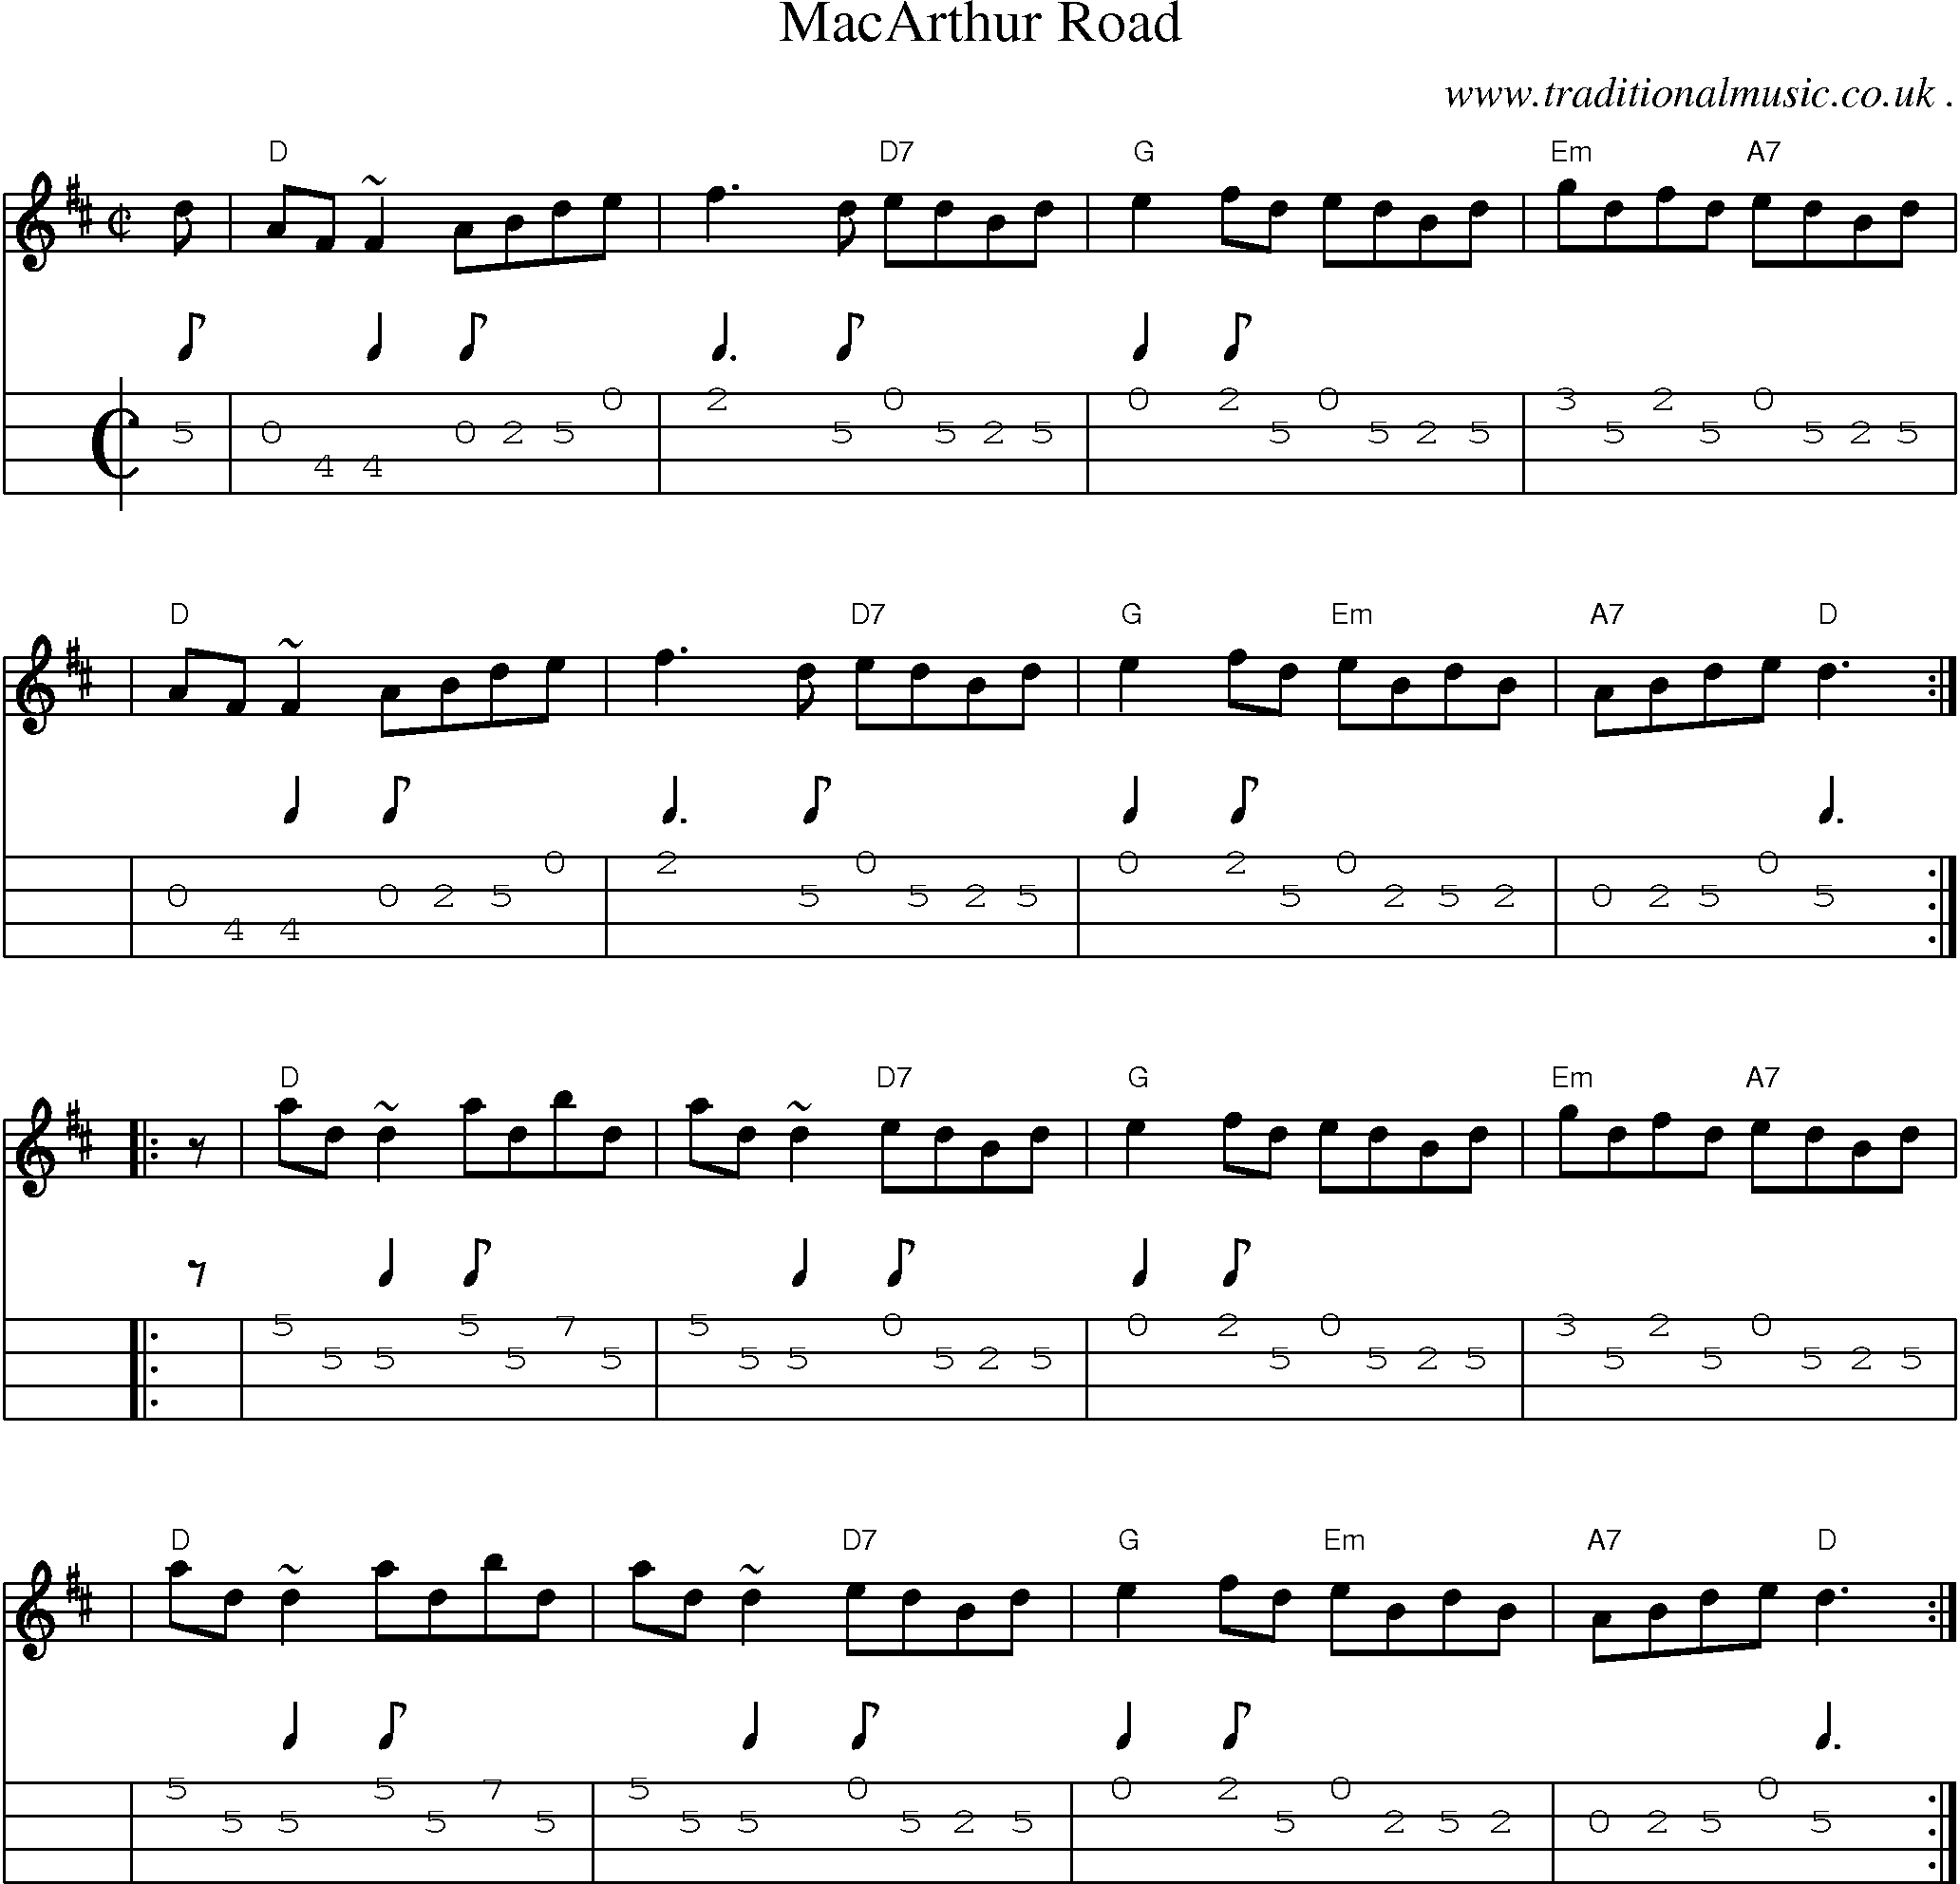 Sheet-music  score, Chords and Mandolin Tabs for Macarthur Road